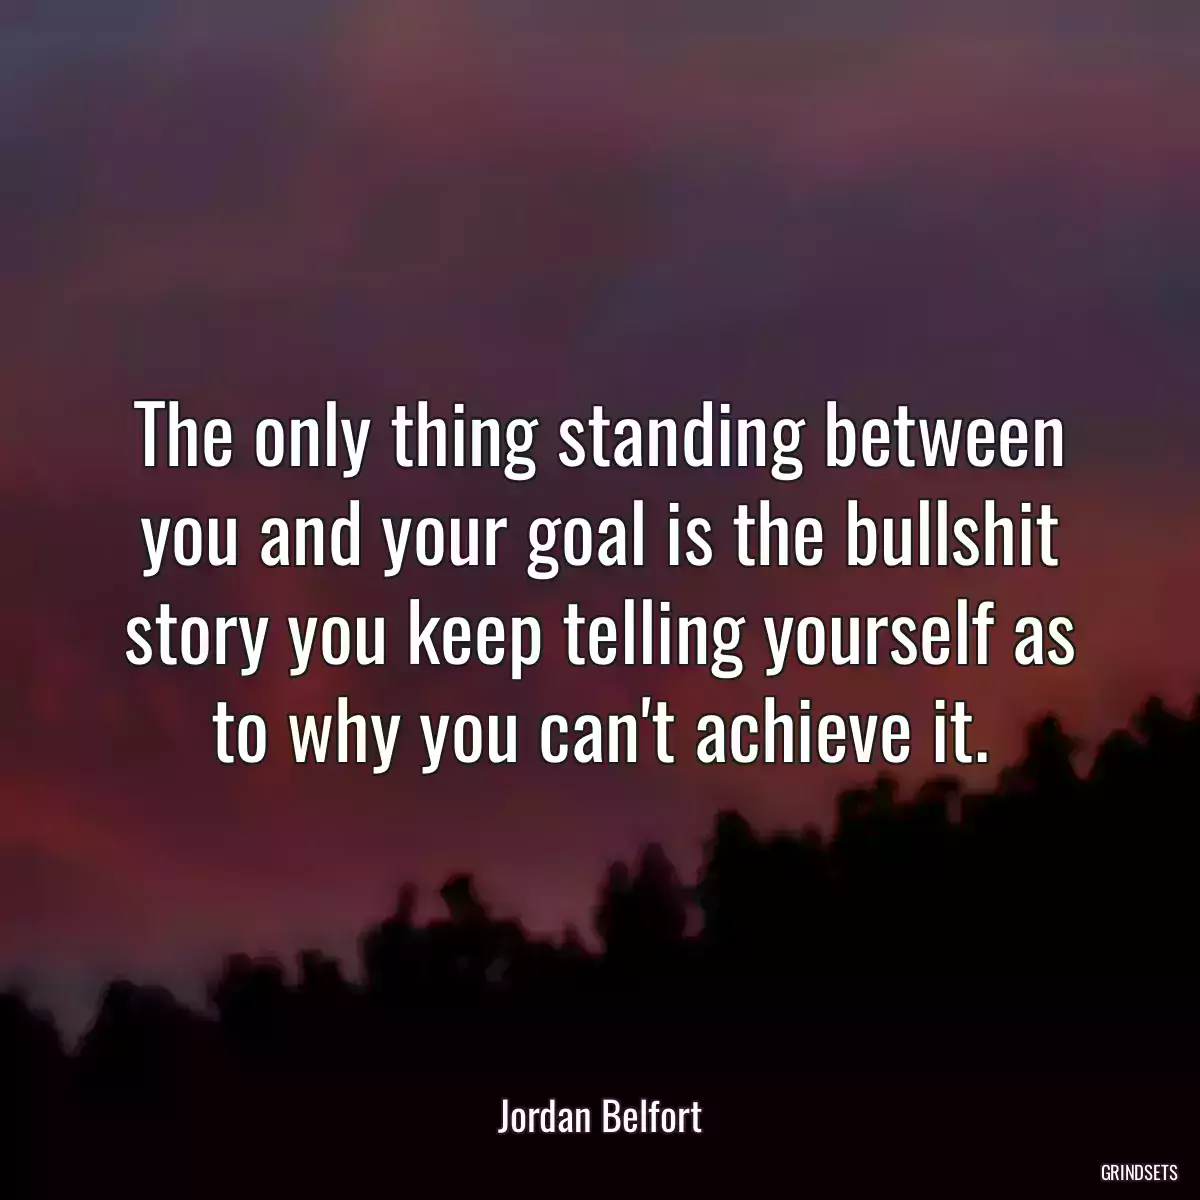 The only thing standing between you and your goal is the bullshit story you keep telling yourself as to why you can\'t achieve it.